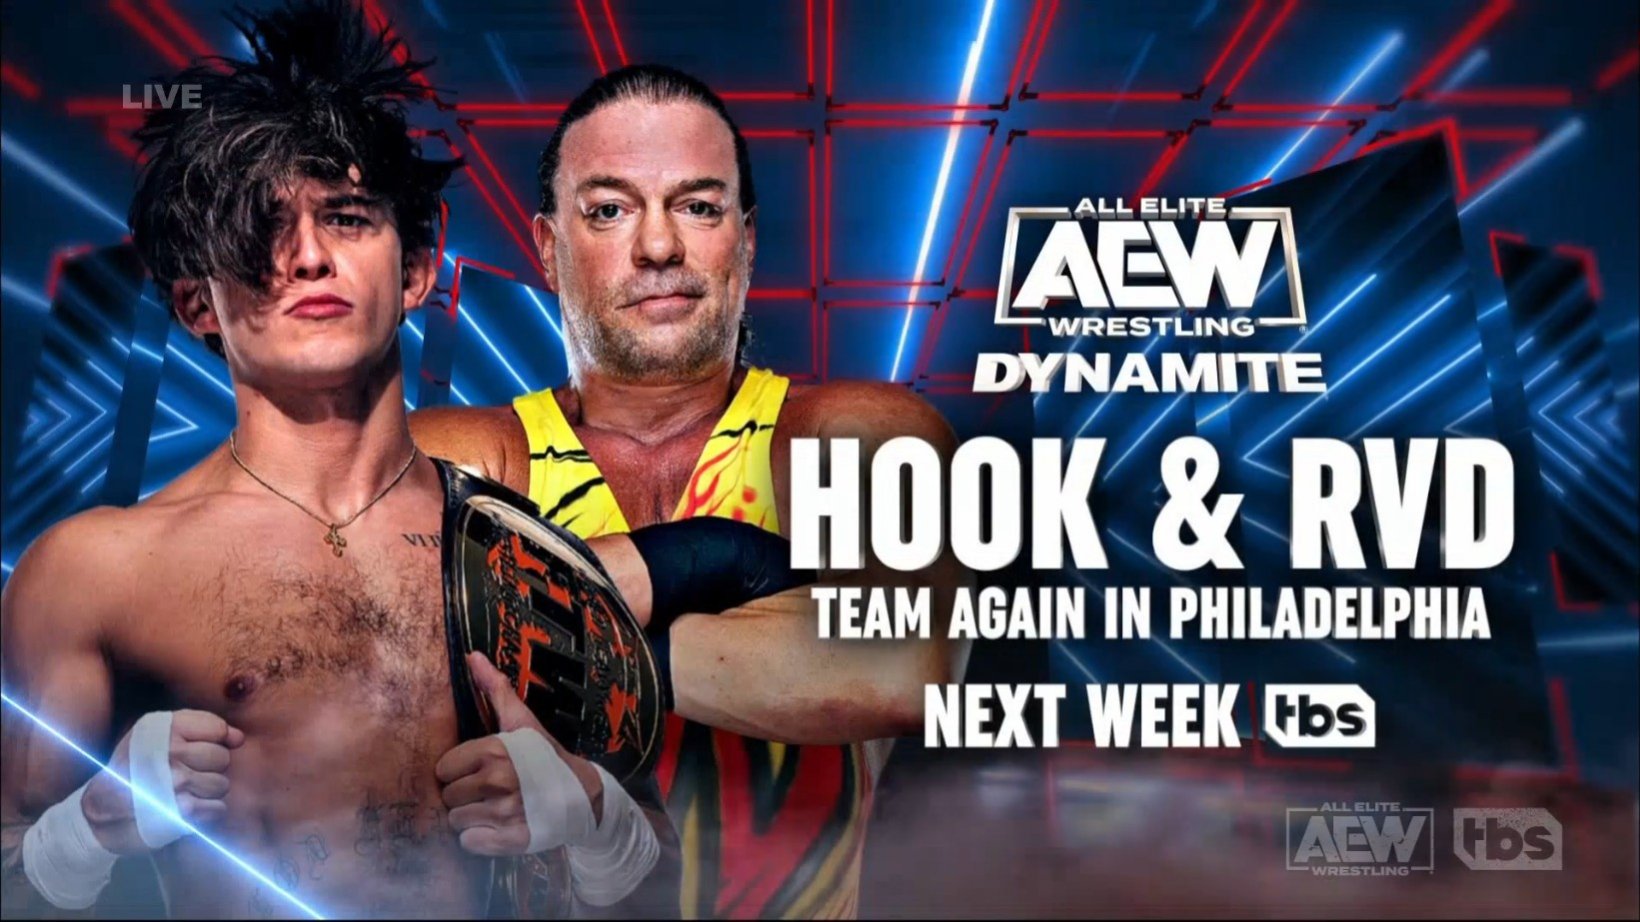 Tony Khan Has Gift For Sting, RVD Returns To Team With HOOK and More  Announced For October 25th AEW Dynamite